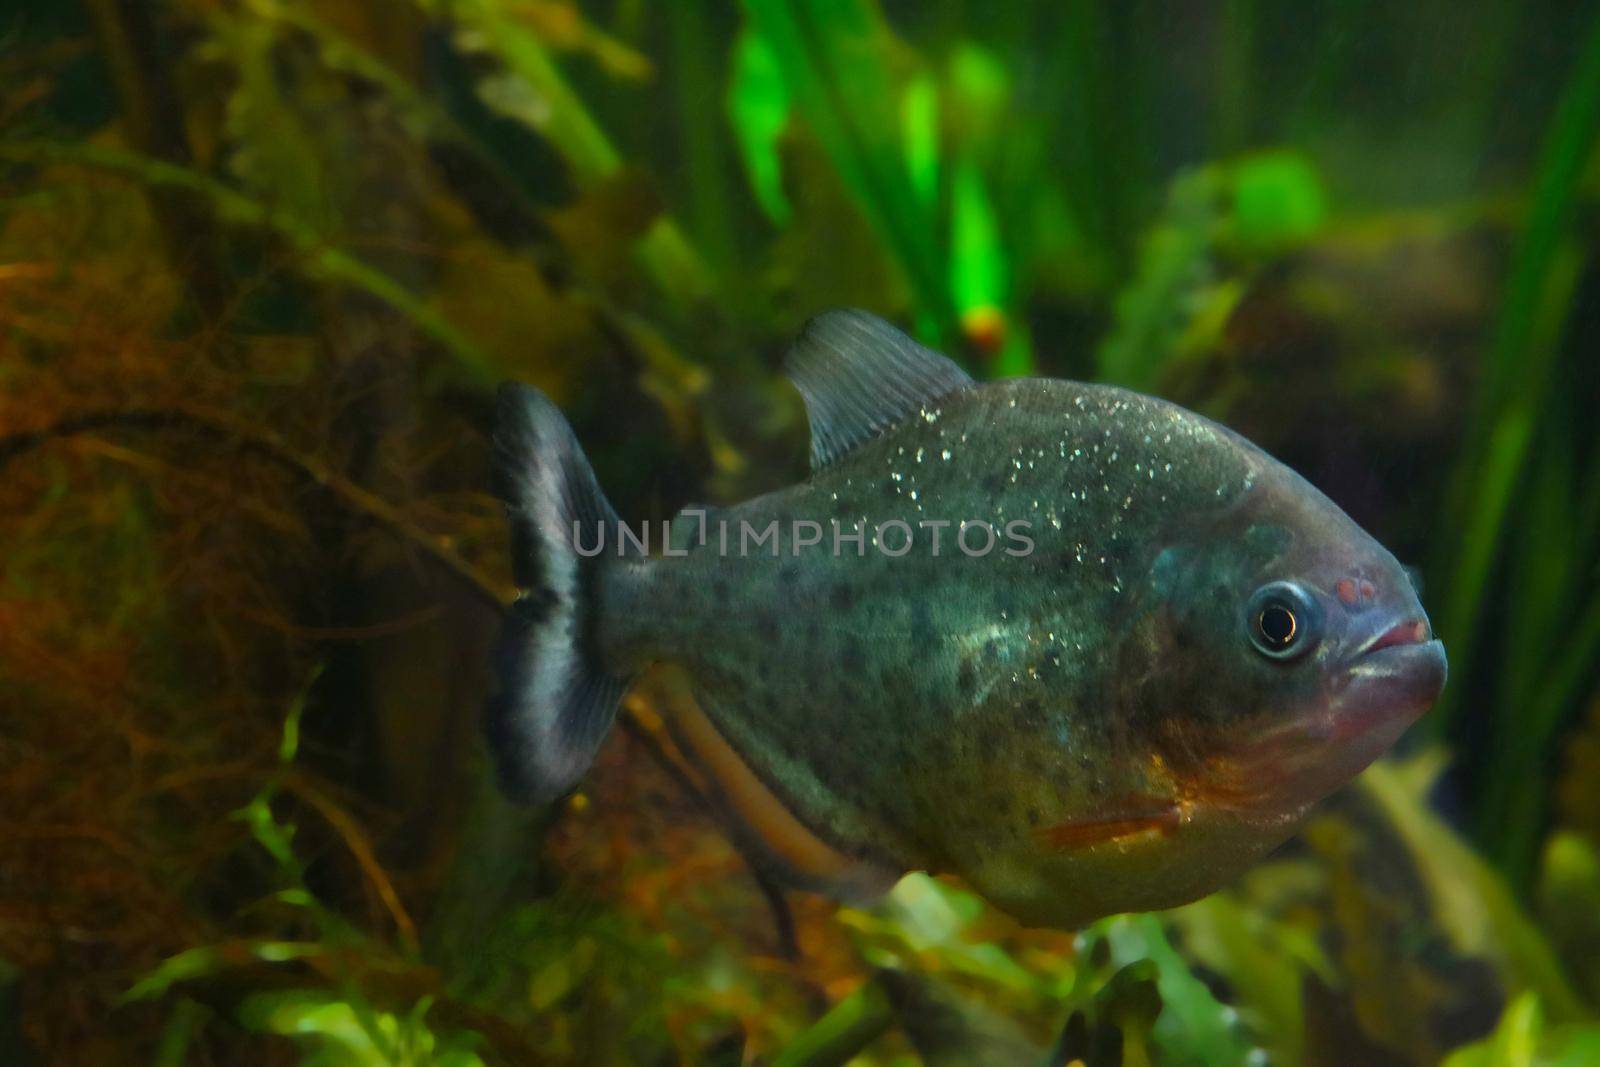 Underwater shooting of a floating fish - piranha